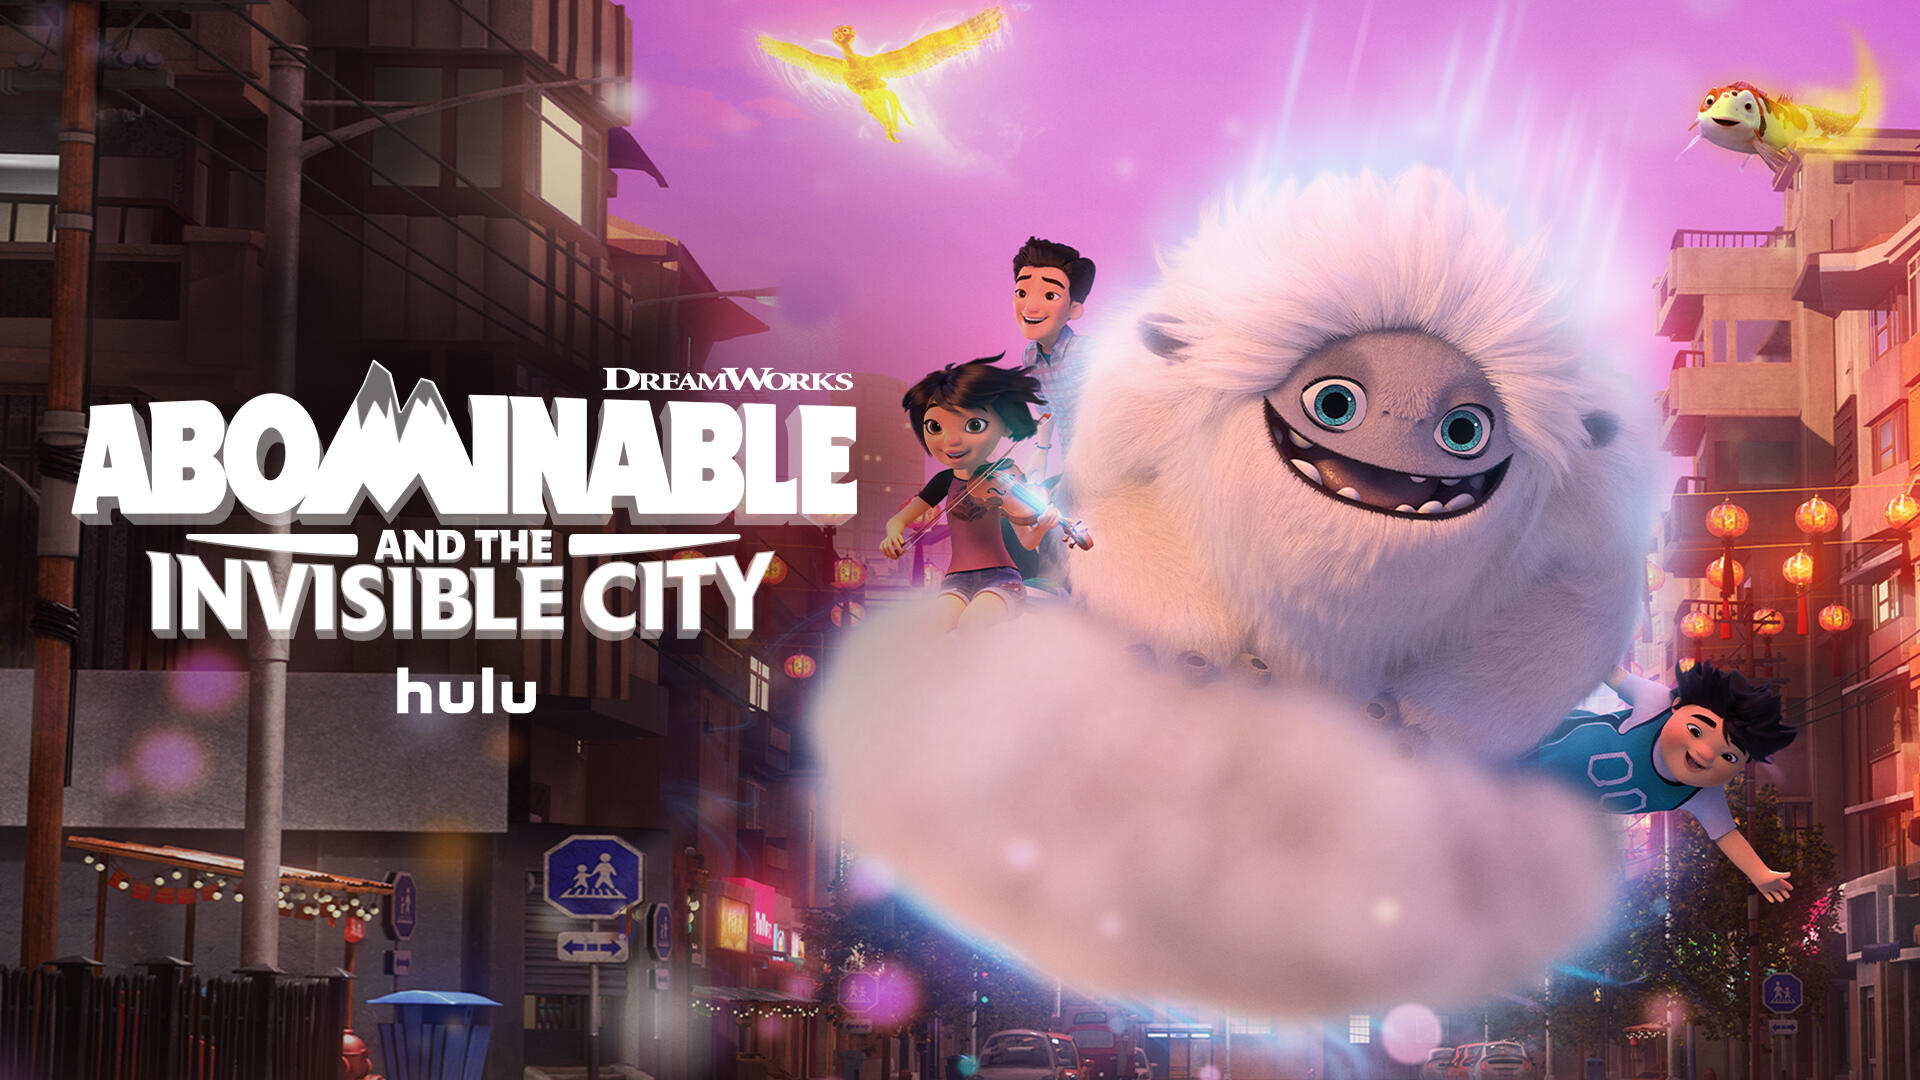 Abominable and the Invisible City -- Season 1 -- “Abominable and the Invisible City” is a comedy adventure series that continues the wild and wooly fun of DreamWorks Animation's “Abominable.” Through Everest the yeti, Yi, Jin, and Peng know that there’s a whole magical world out there, and now it’s even closer than they think! When they discover that their surroundings are teeming with magical creatures in need of their help, the kids will set out on extraordinary and heartfelt adventures throughout their city and beyond. (Courtesy of DreamWorks)